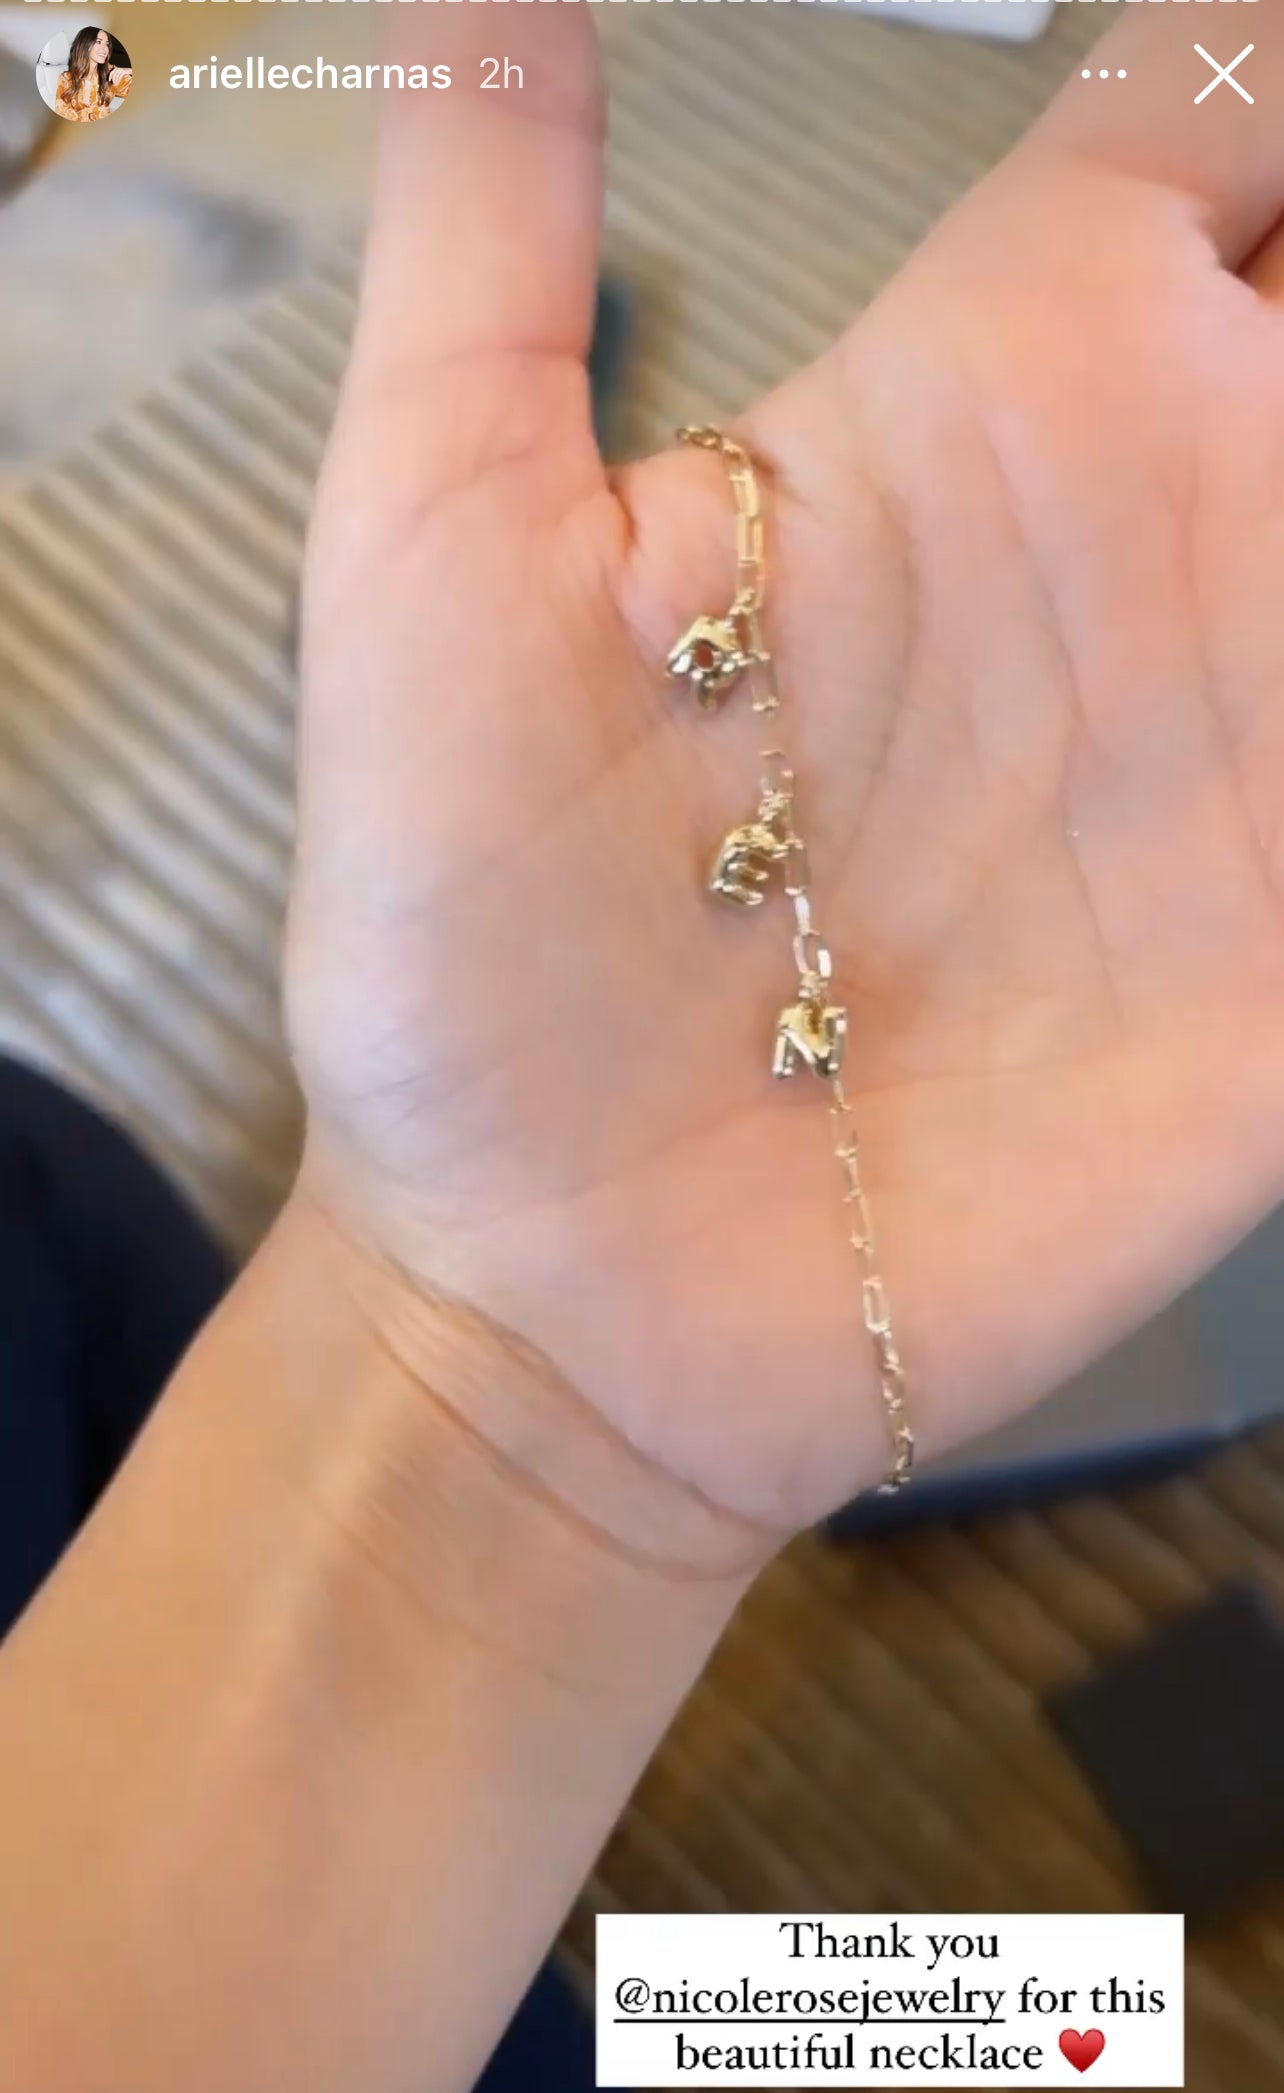 Baby Bubble Charm Necklace - @ariellecharnas